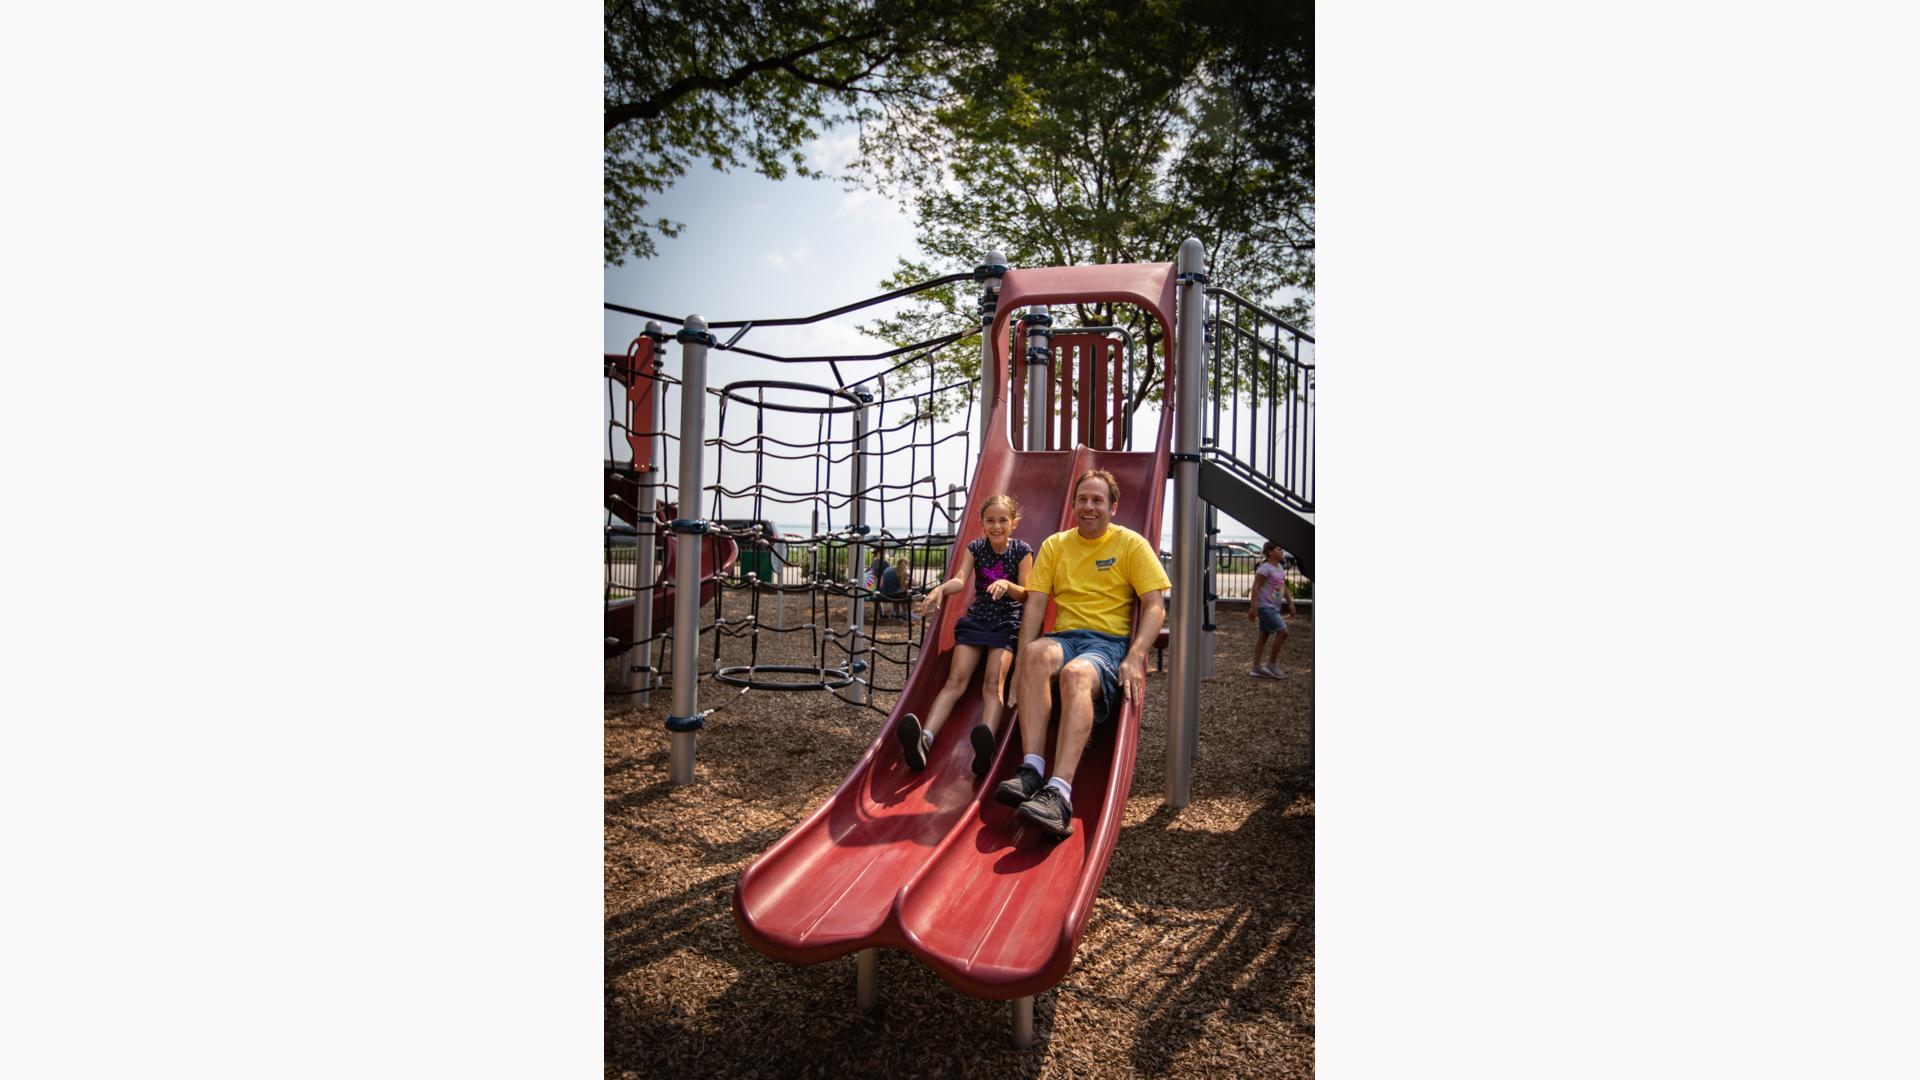 Man and girl ride down slide together